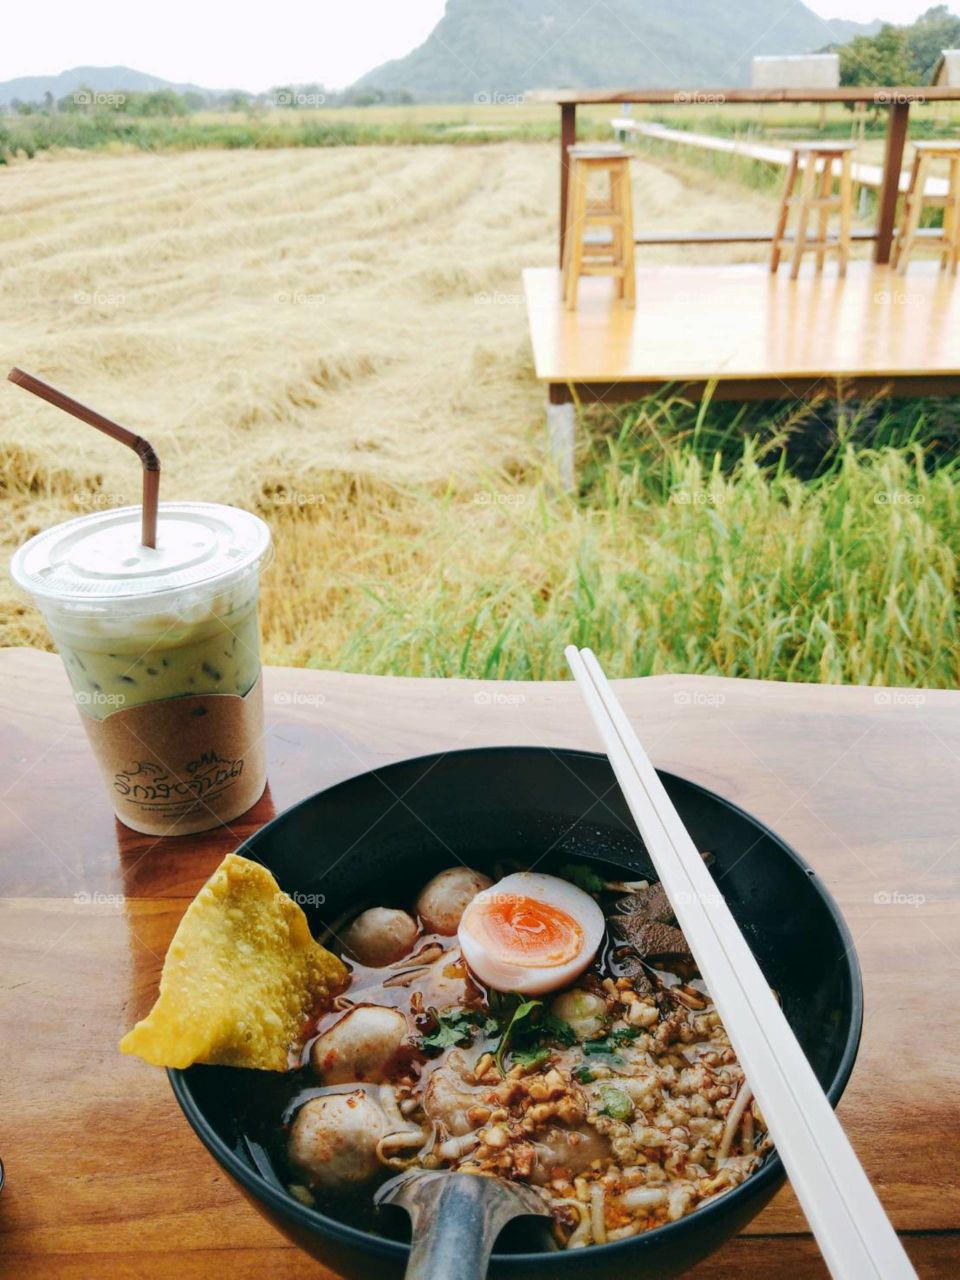 Tom Yum Noodle with Ice Green Tea in the rice field.